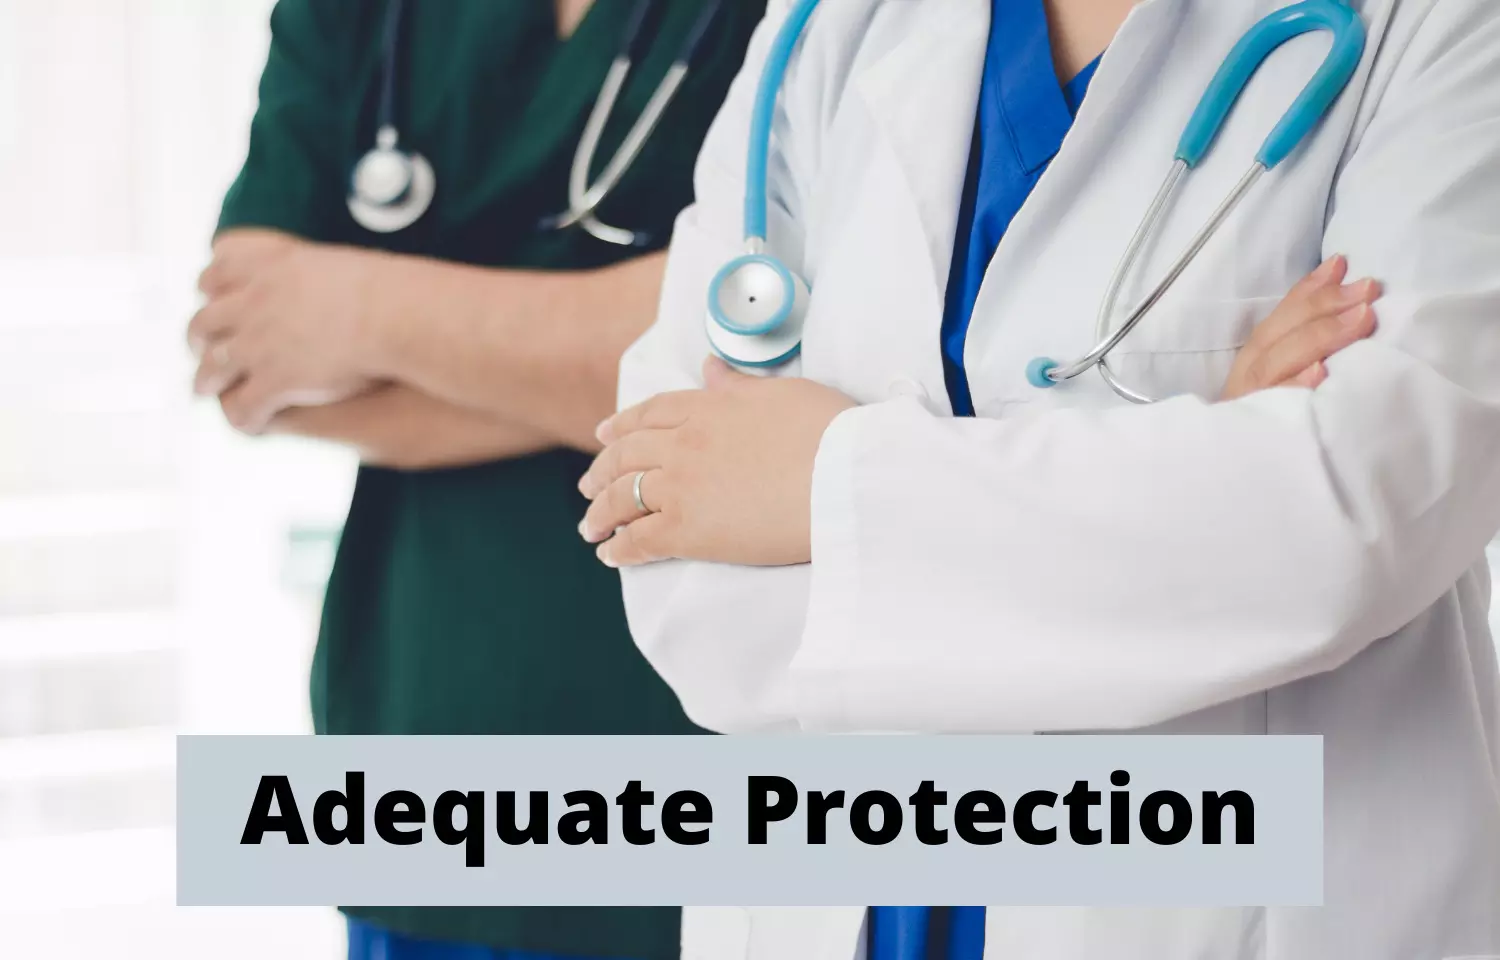 Association of Healthcare Providers India (AHPI) urges PM Modi to ensure protection for Doctors